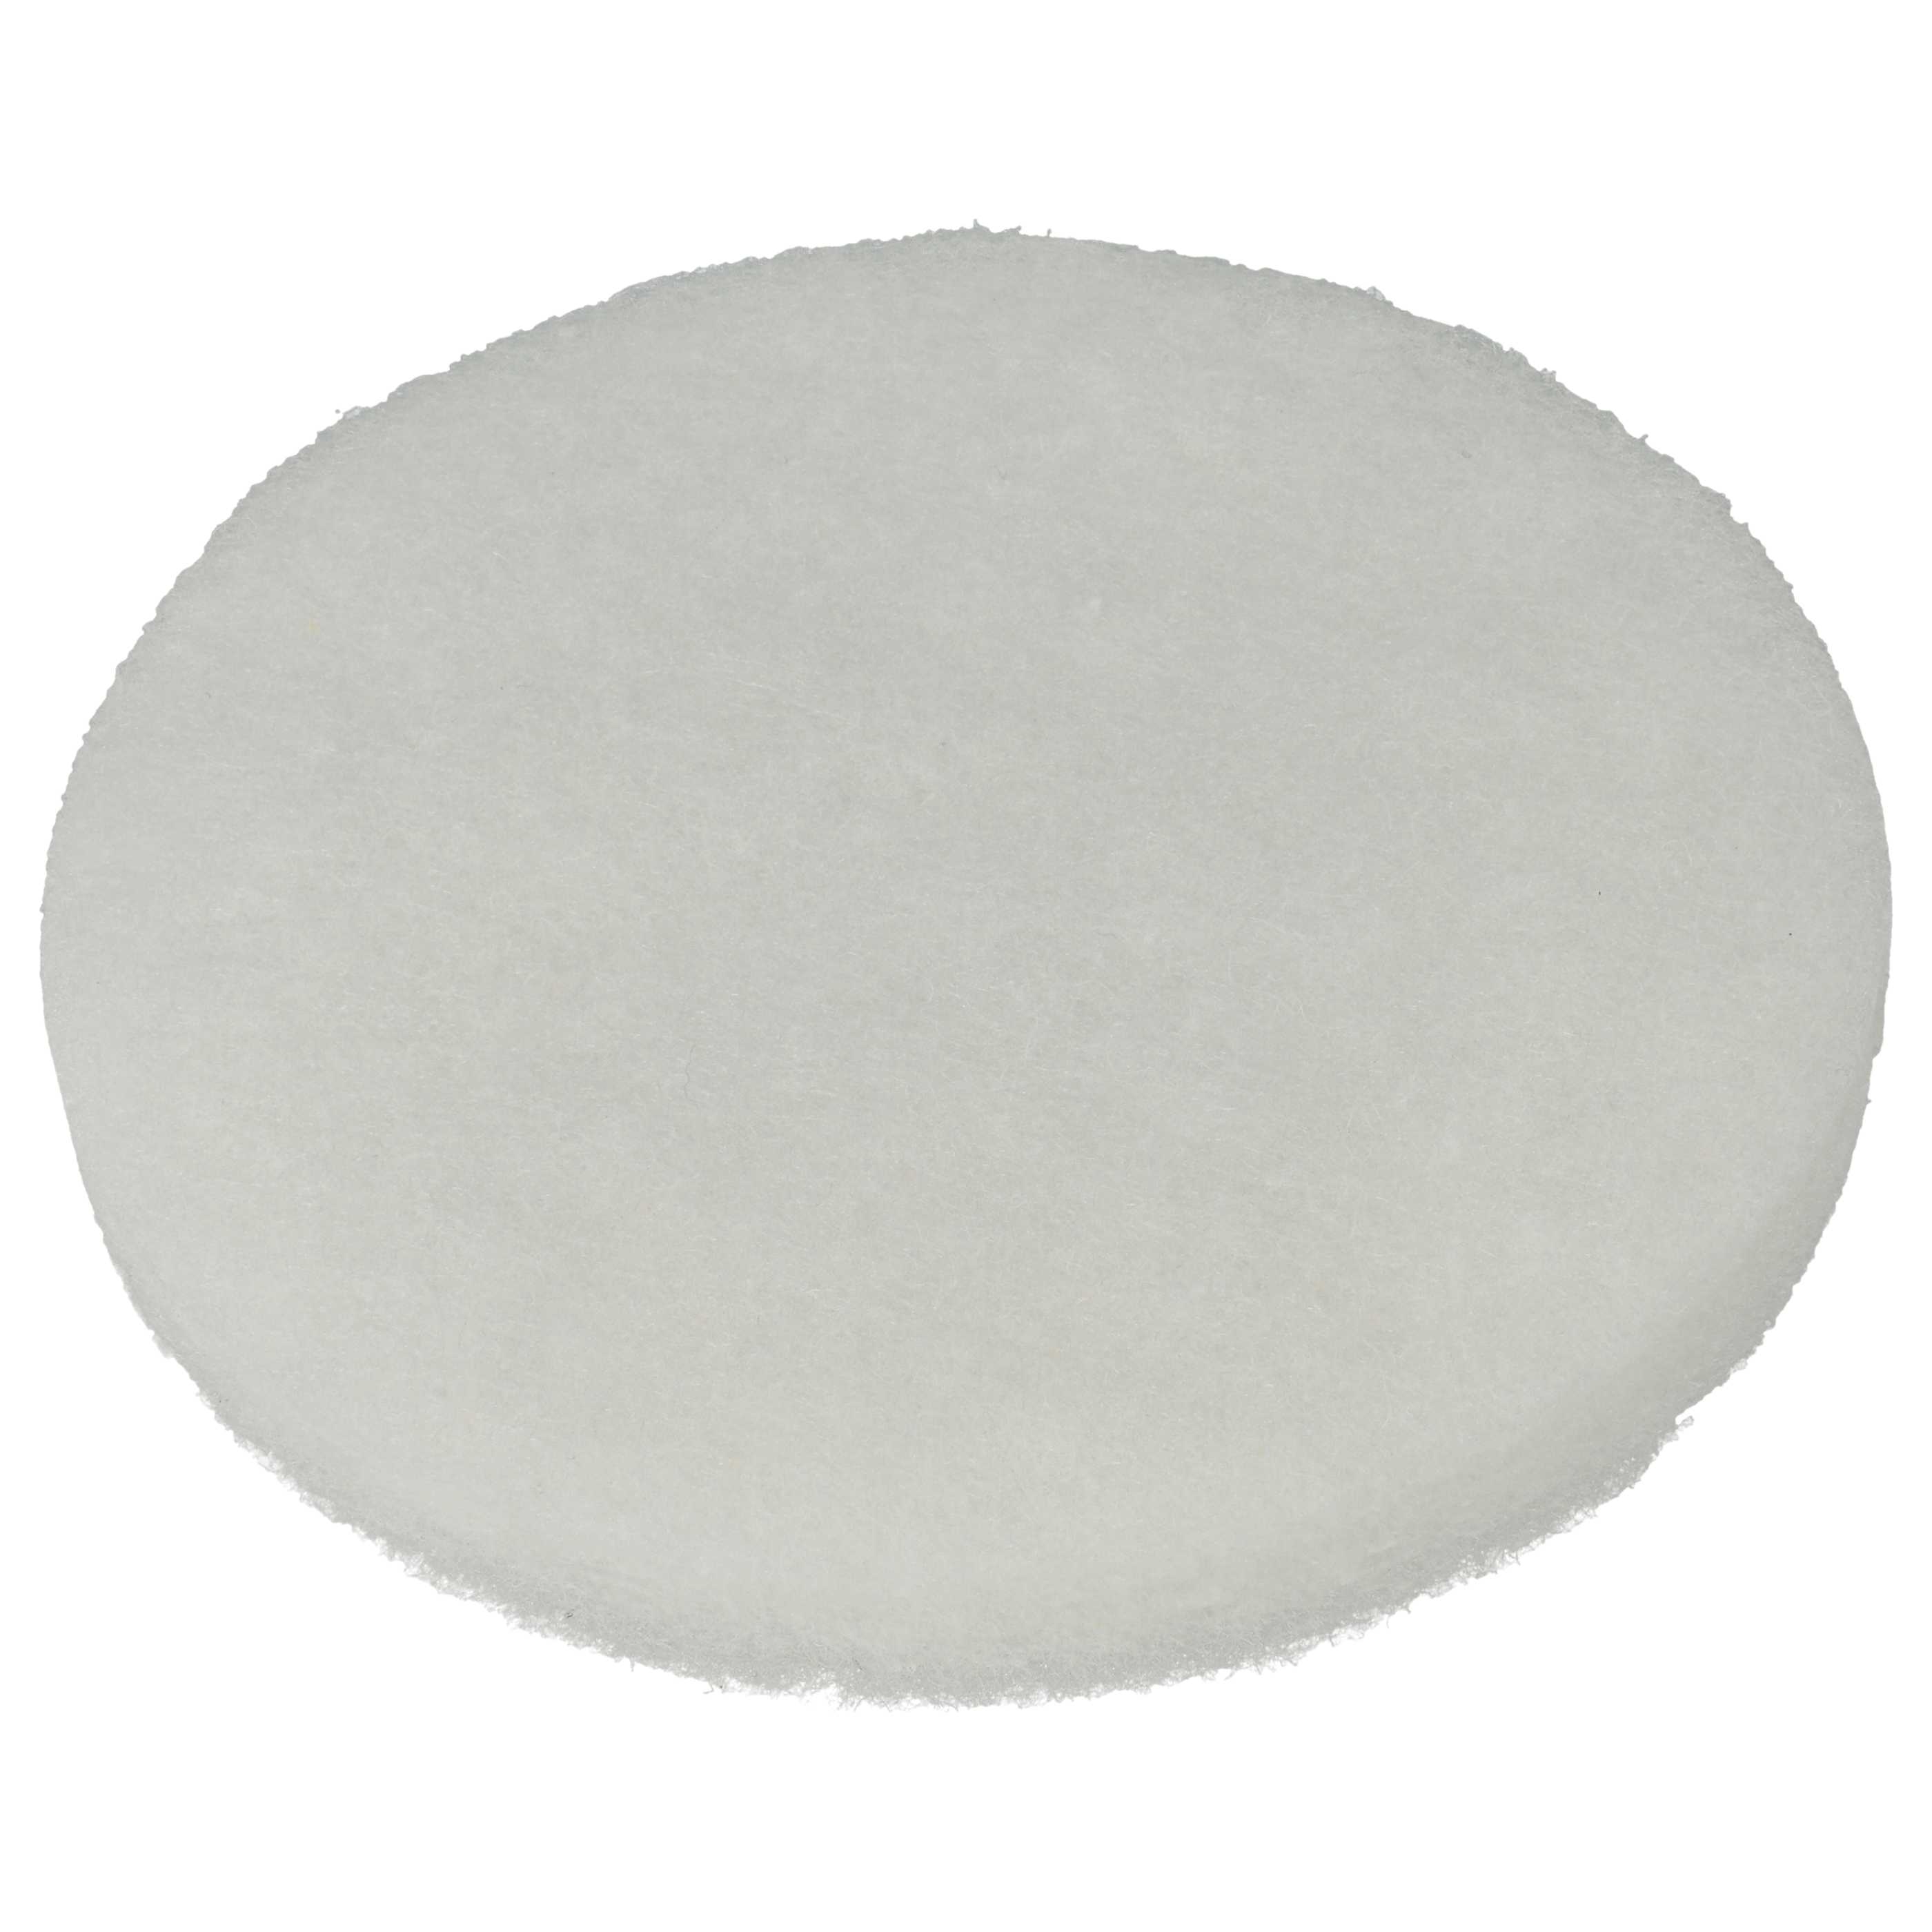 vhbw 8x Air Filter G3 Replacement for Bosch 7735600383 for Vent, Condensation Damp Control Ventilator - White